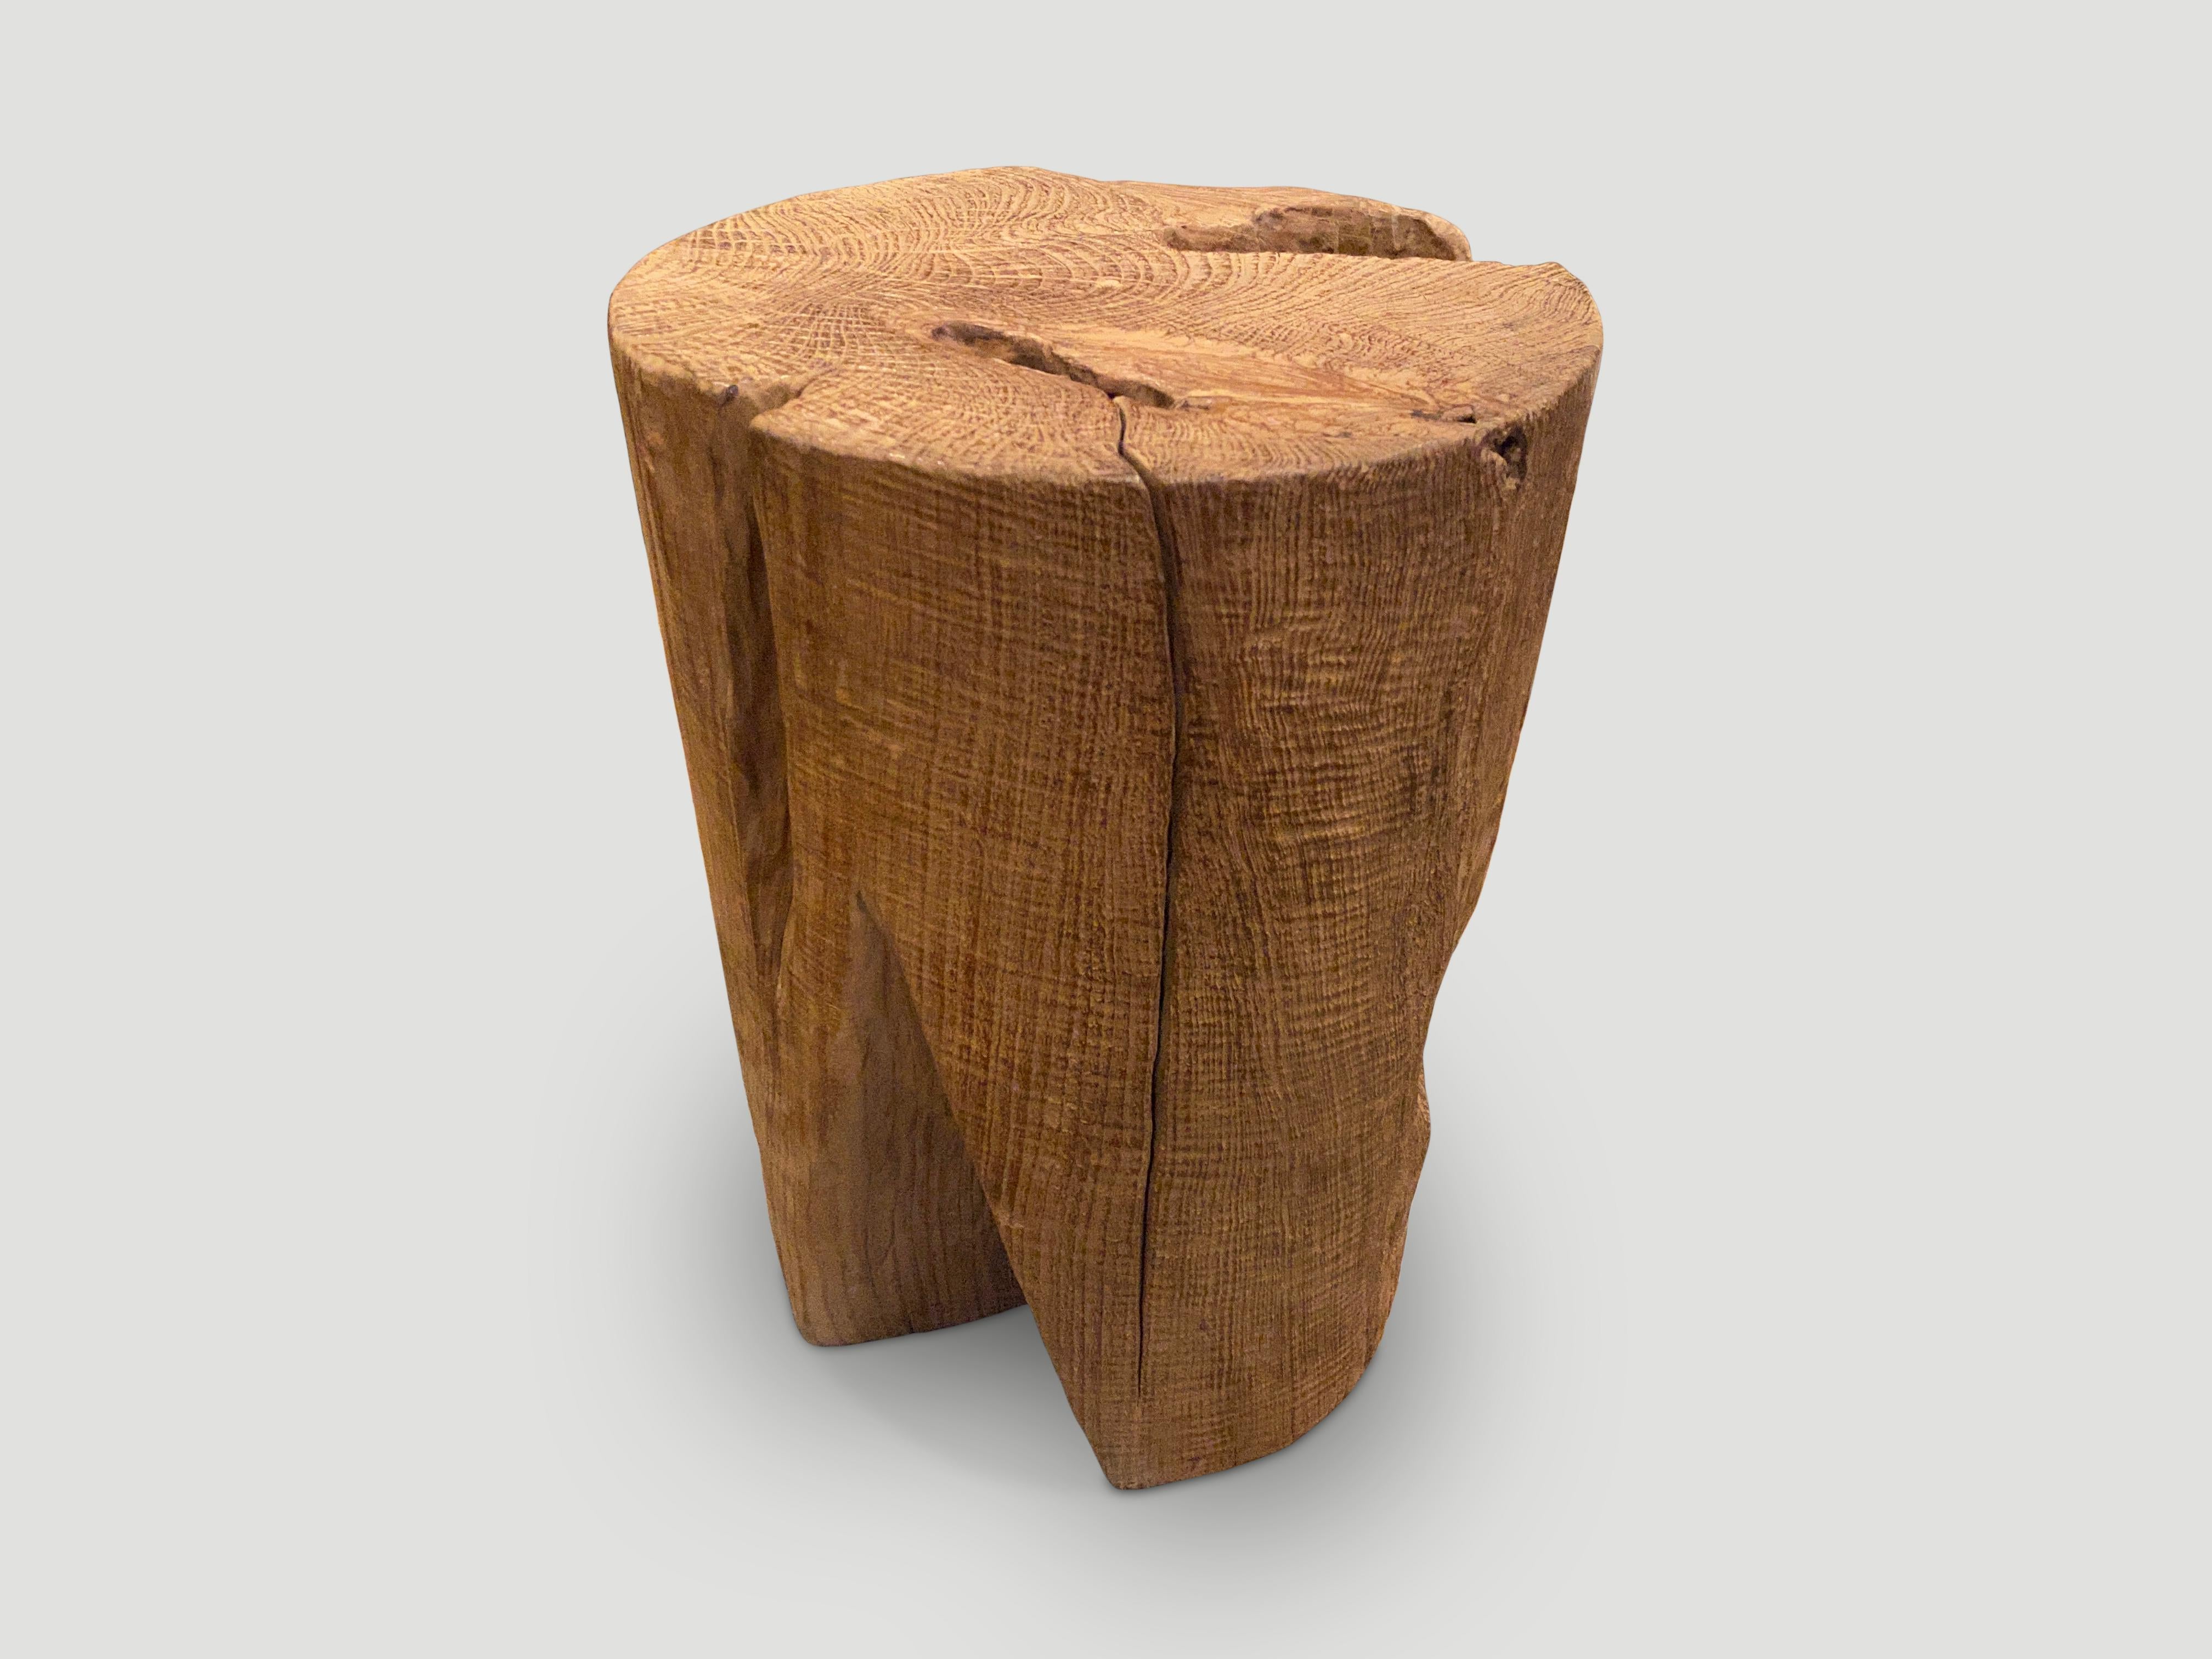 Reclaimed teak wood side table which we have hand carved into this beautiful cylinder shape whilst respecting the organic wood. We used an iron brush to reveal the natural wood grain.

This side table was hand made in the spirit of Wabi-Sabi, a